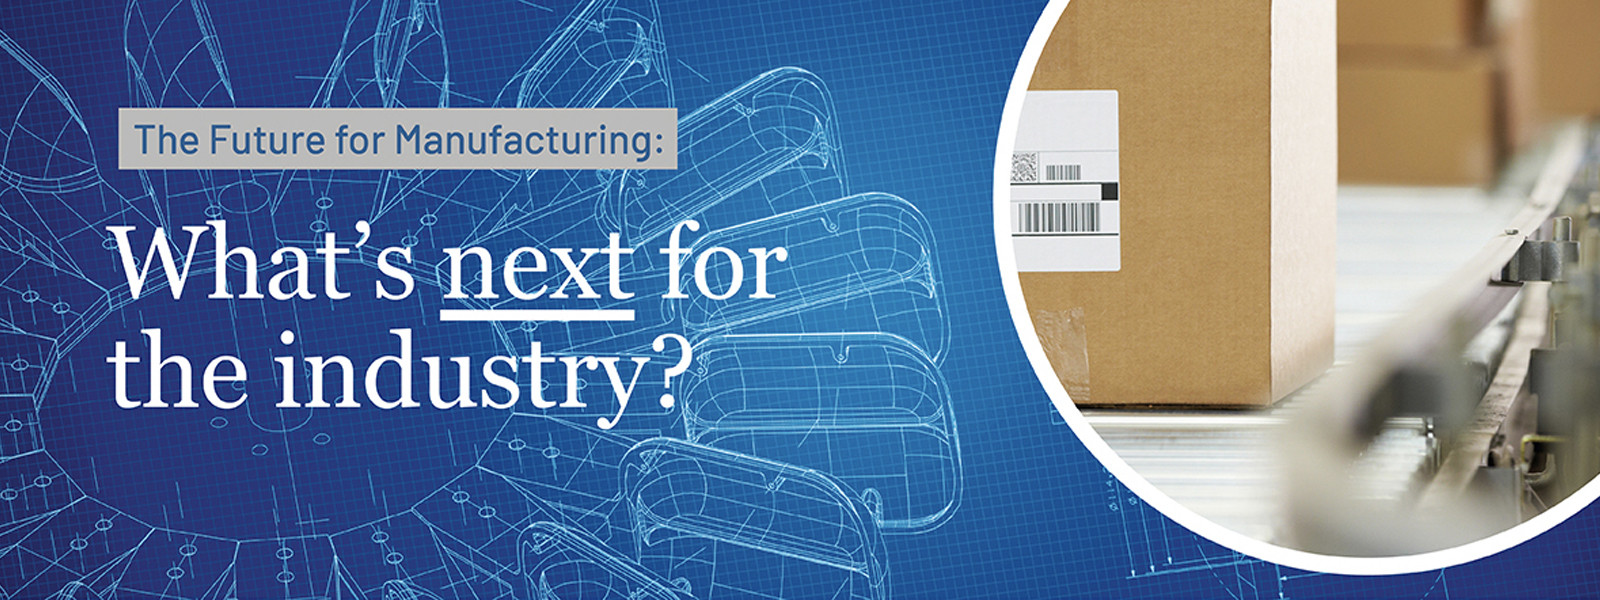 The Future for Manufacturing: What’s Next for the Industry?